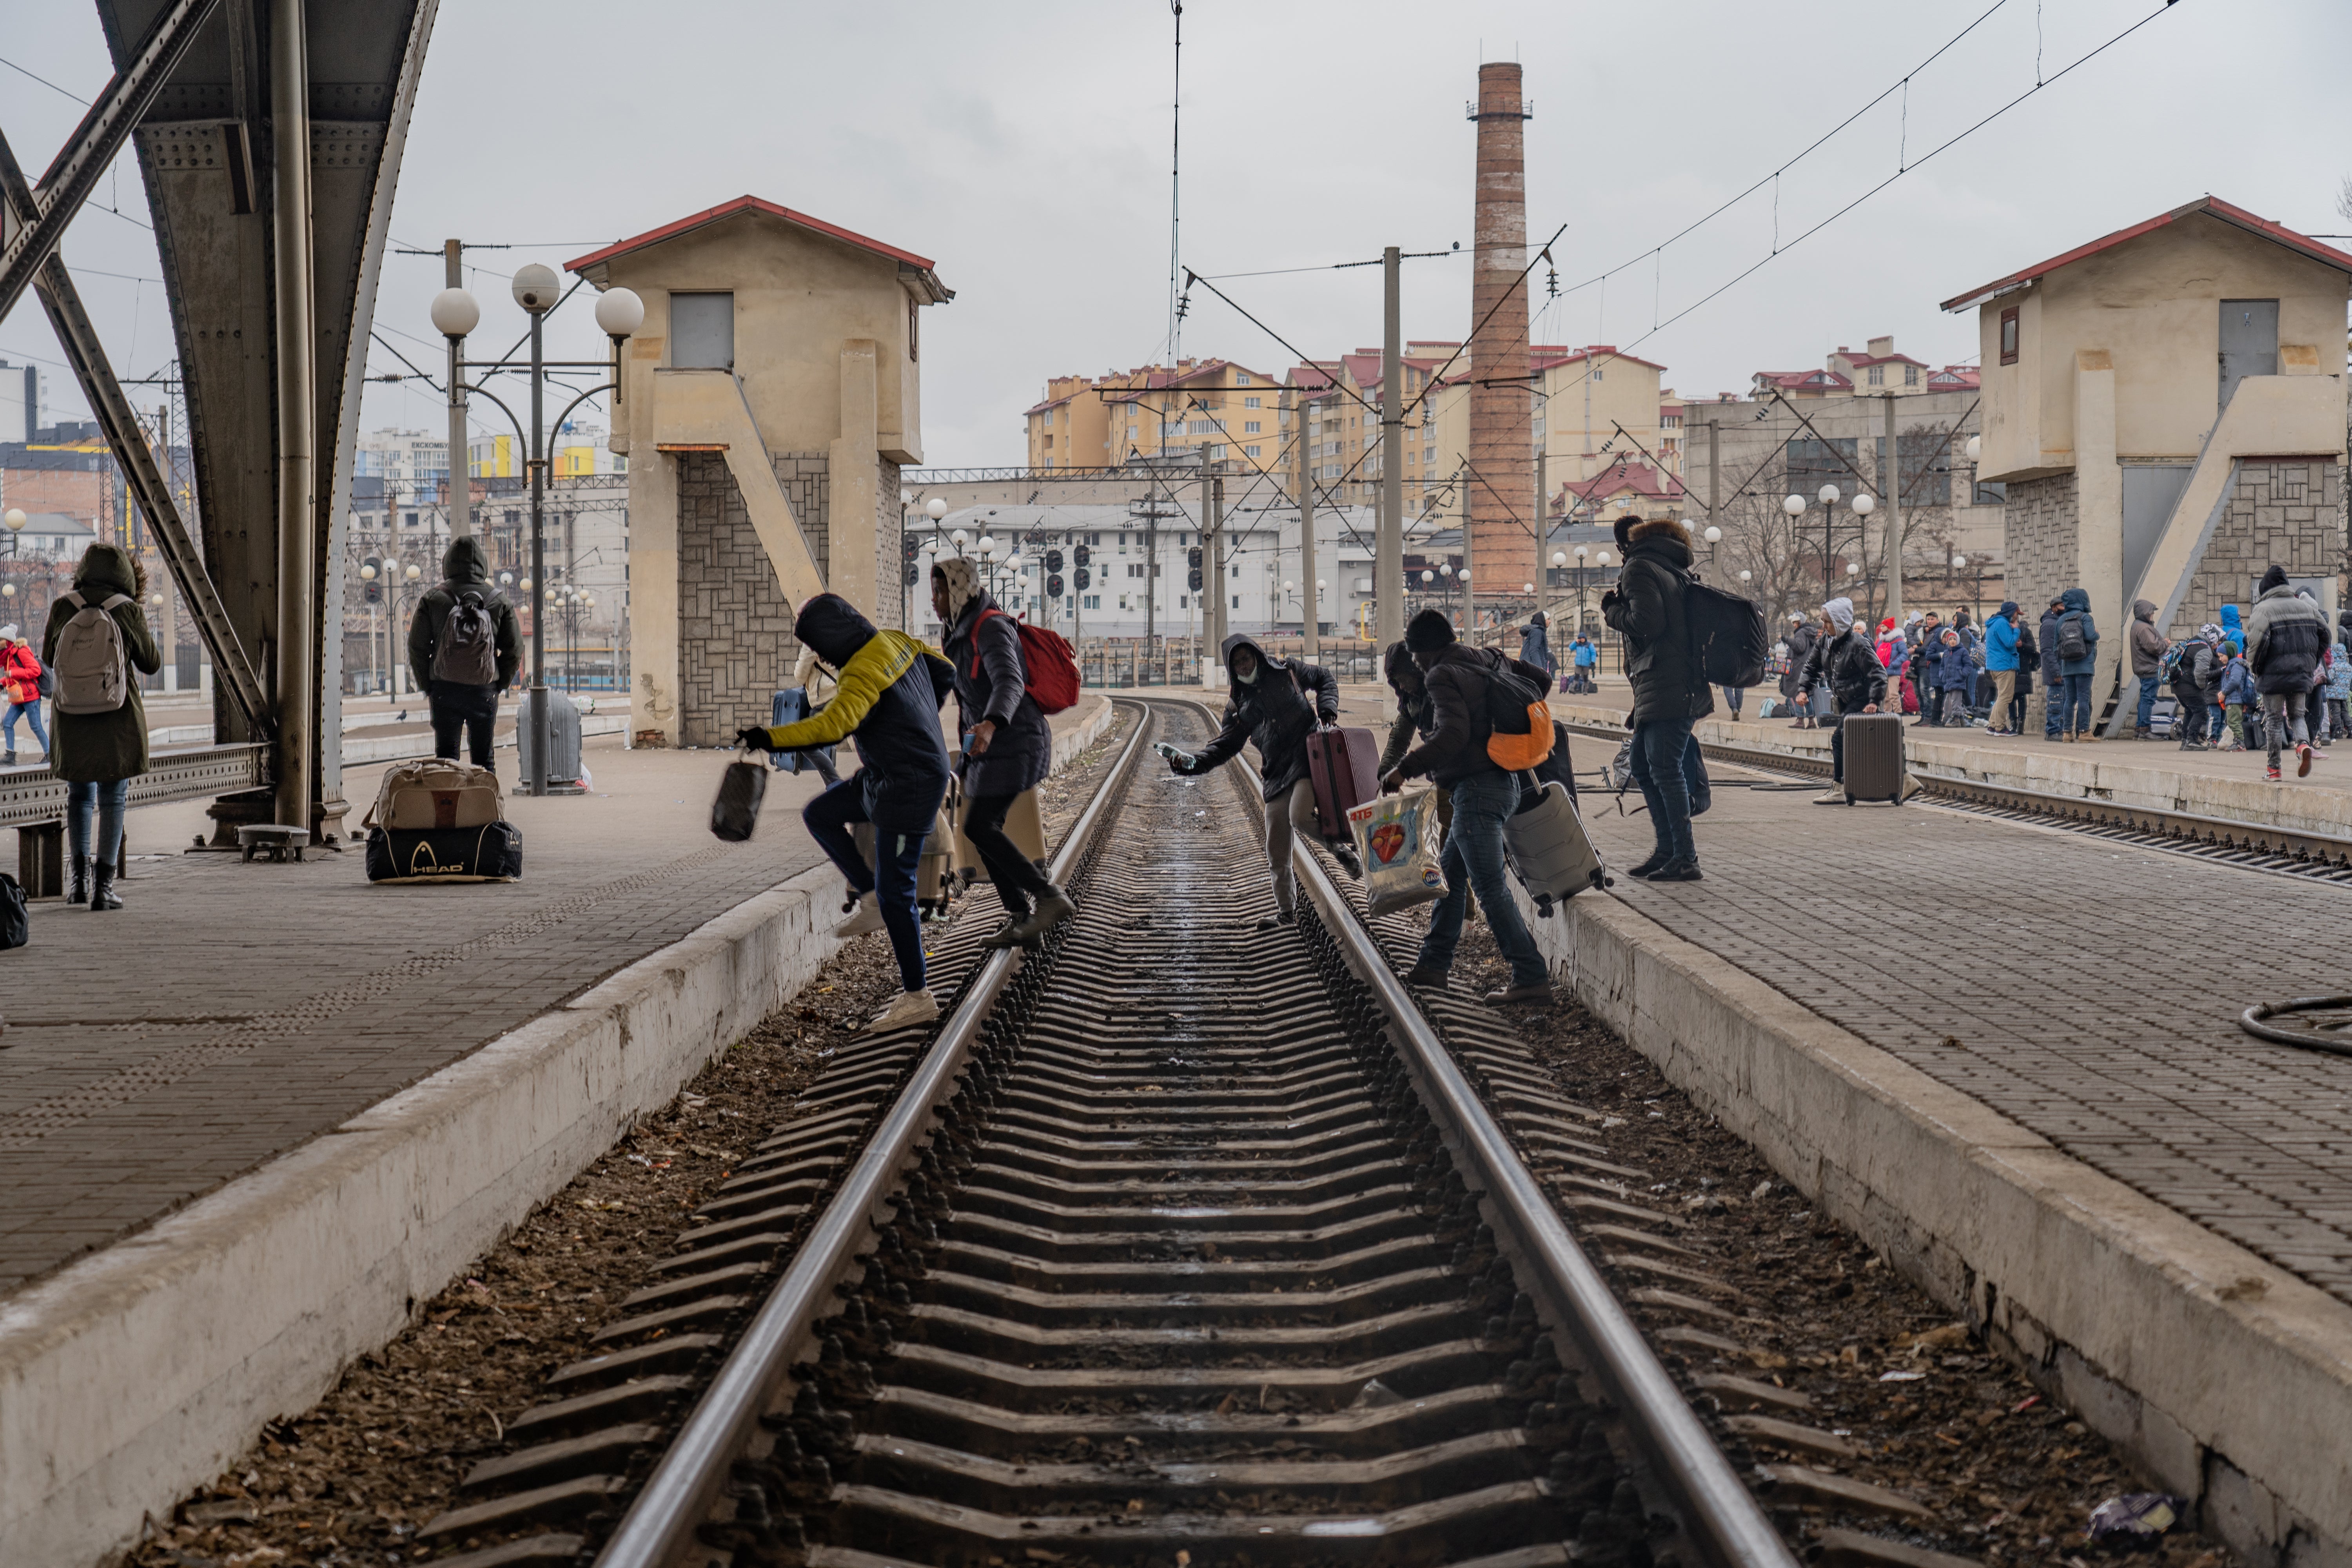 A group of Nigerian refugees move between platforms hoping to catch a train